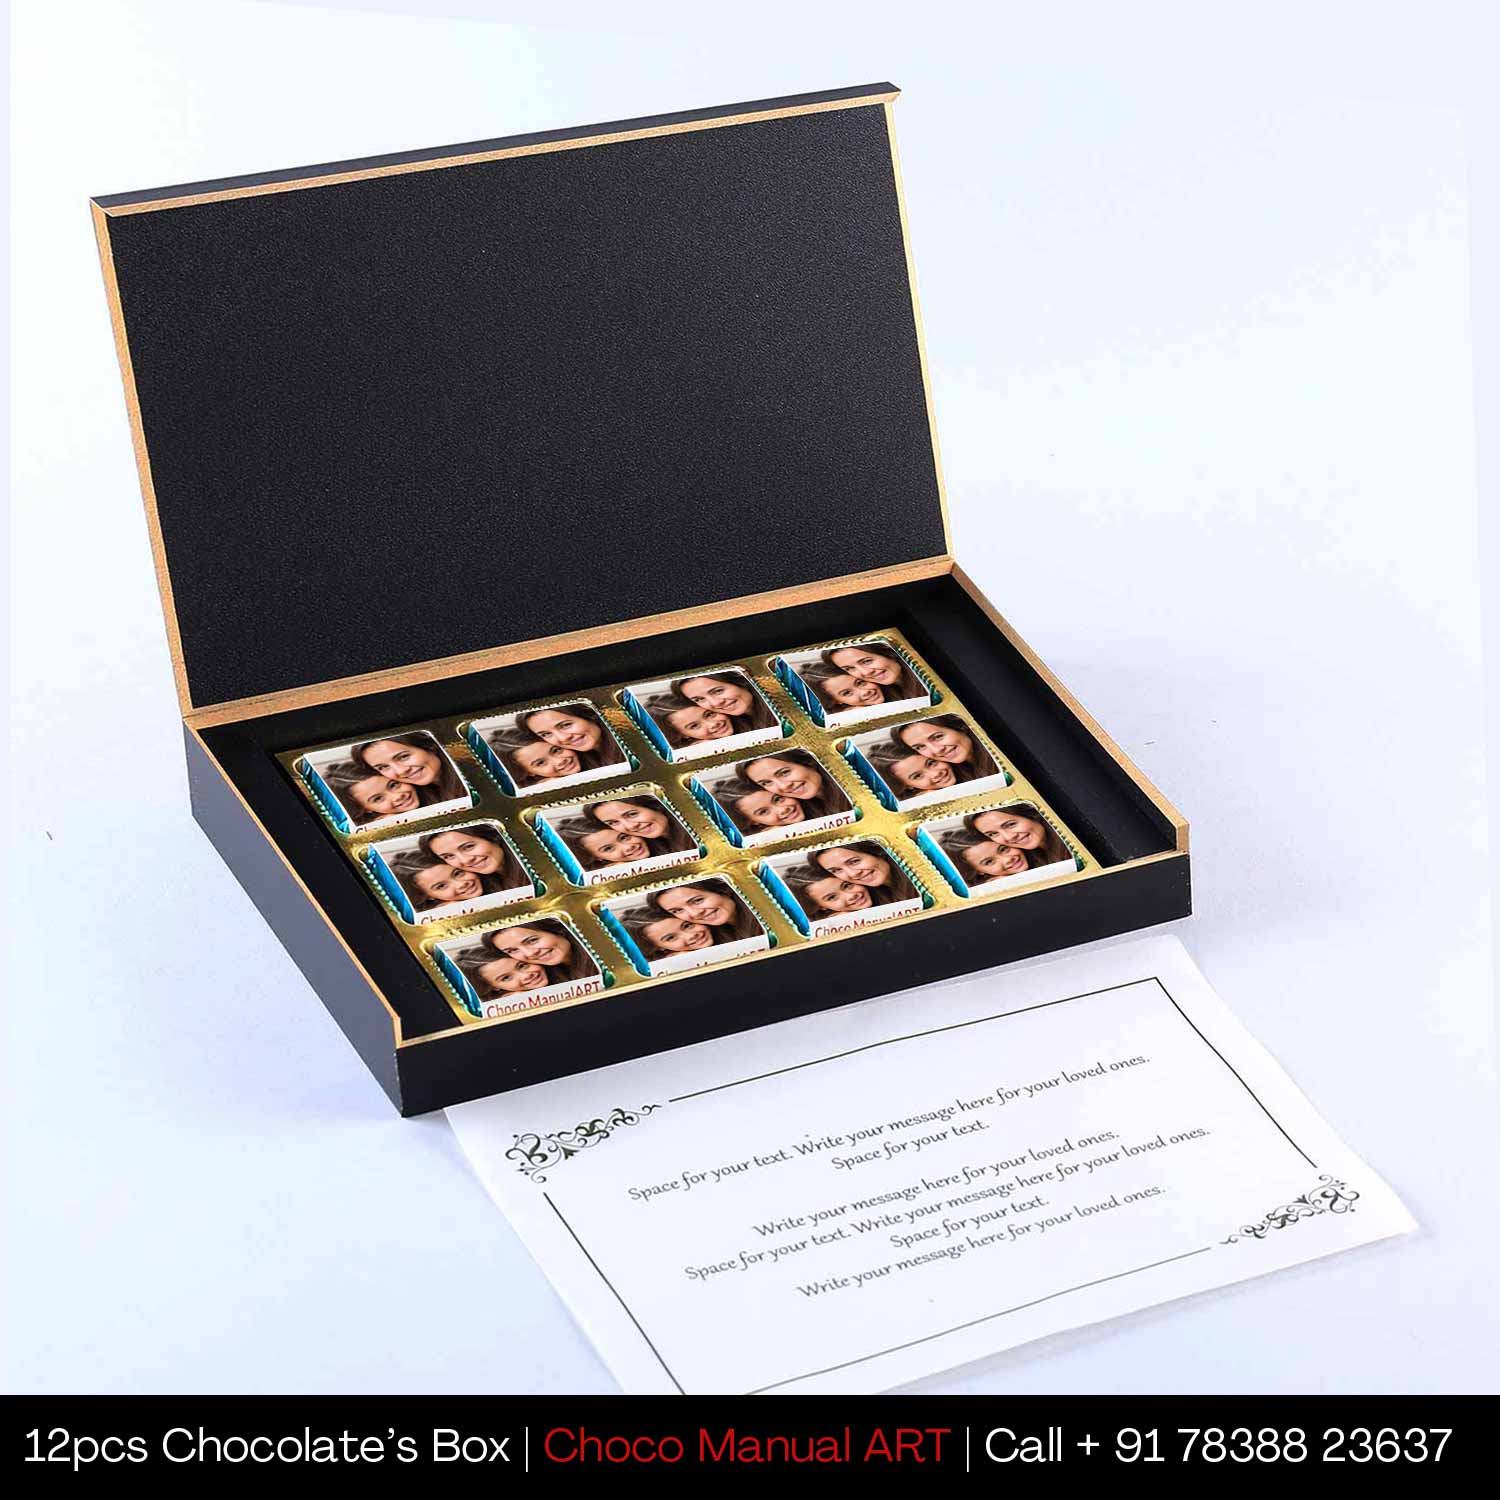 Personalized printed box of Wrapper printed chocolates